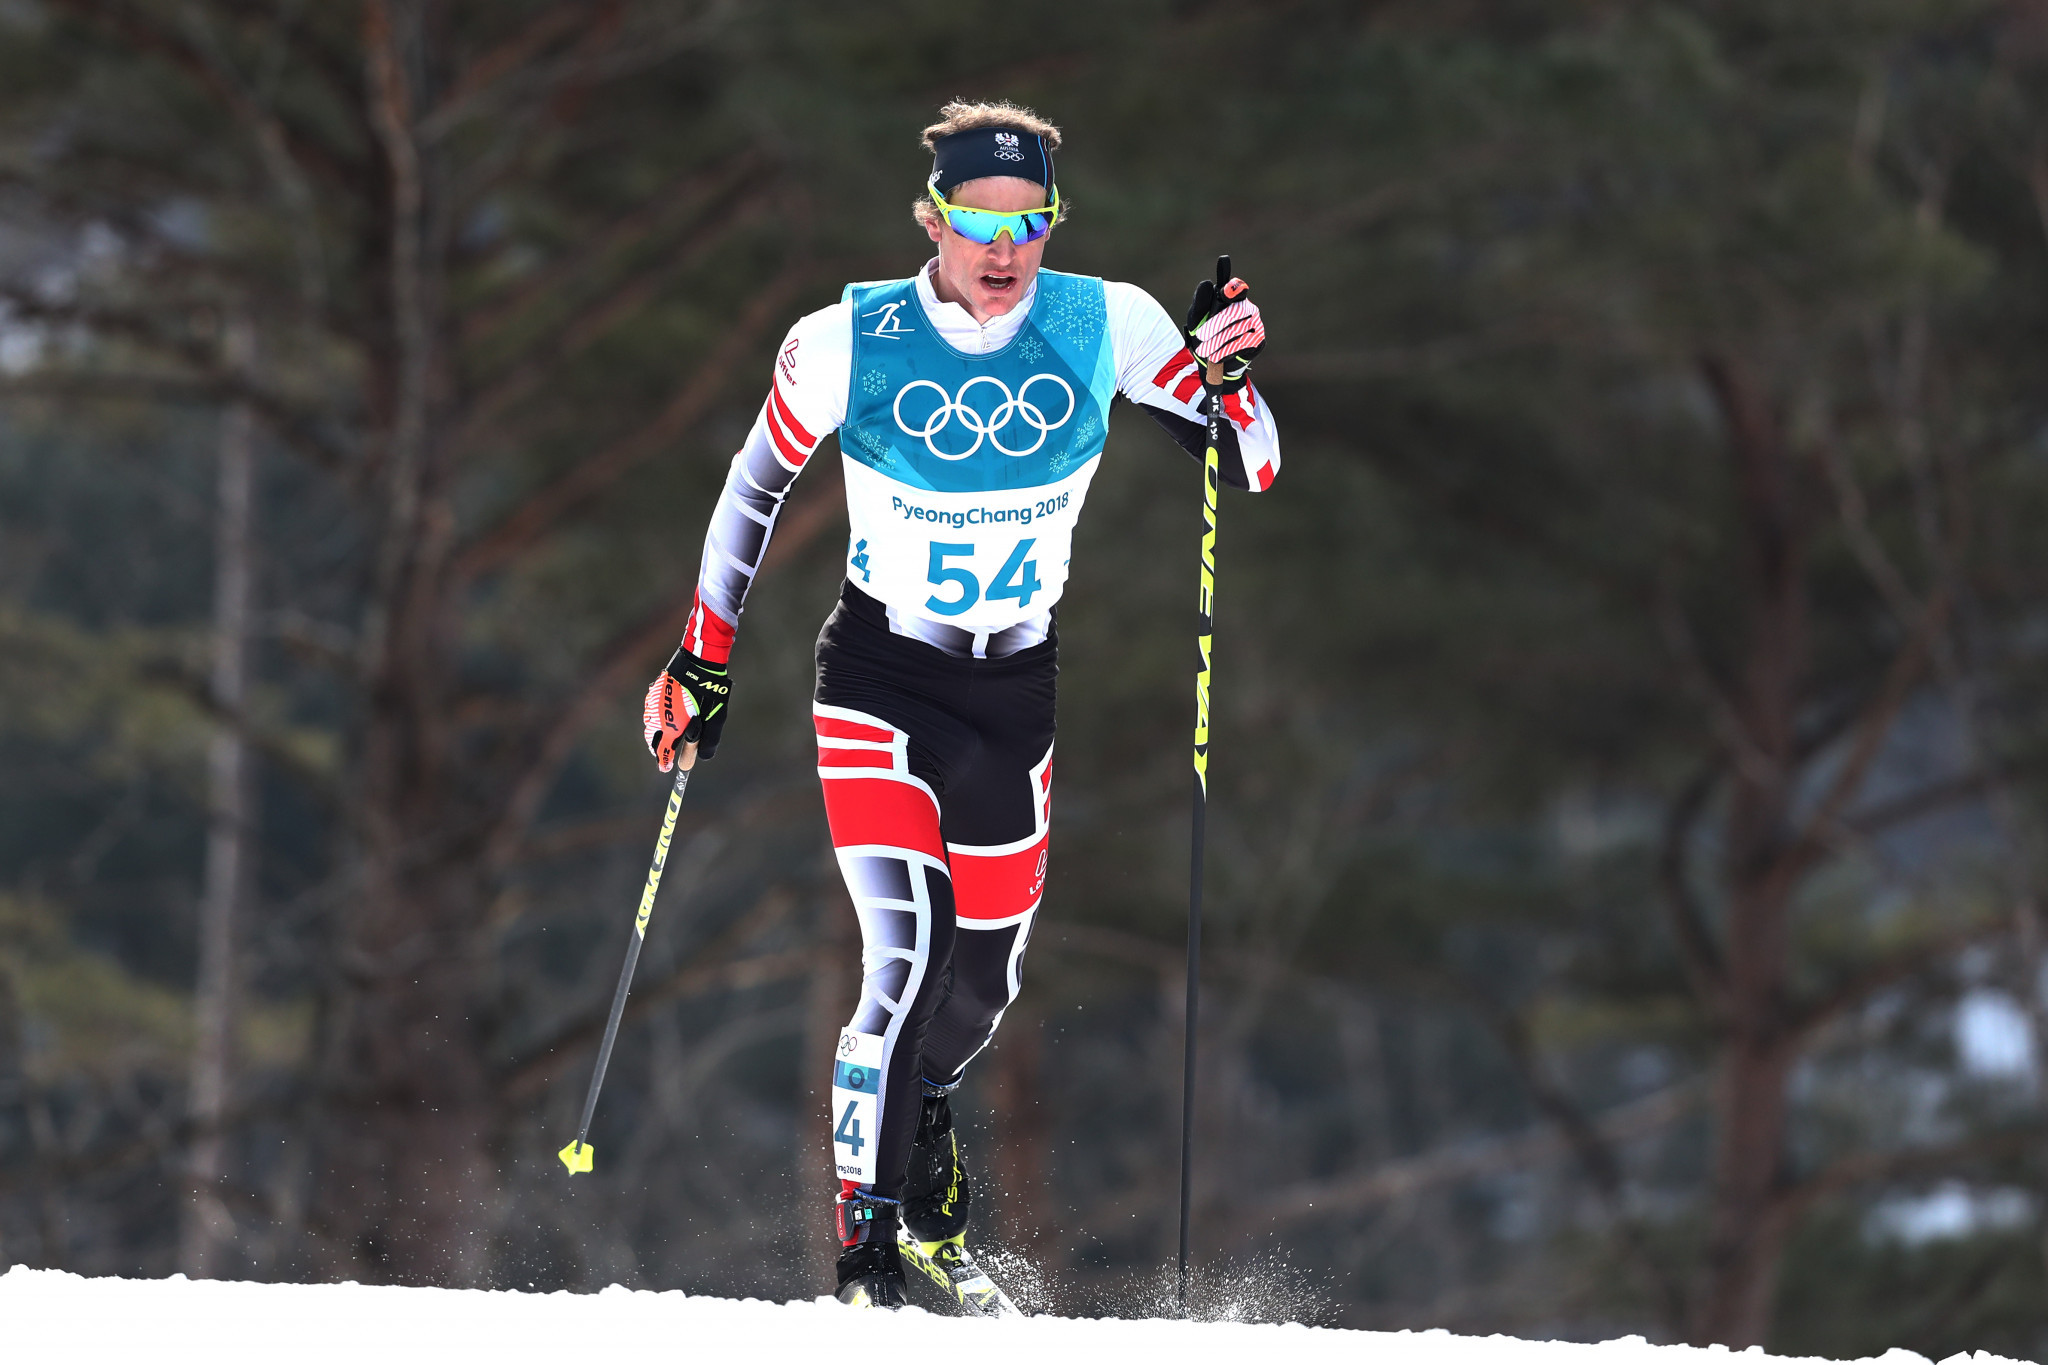 Tritscher announces retirement from cross-country skiing